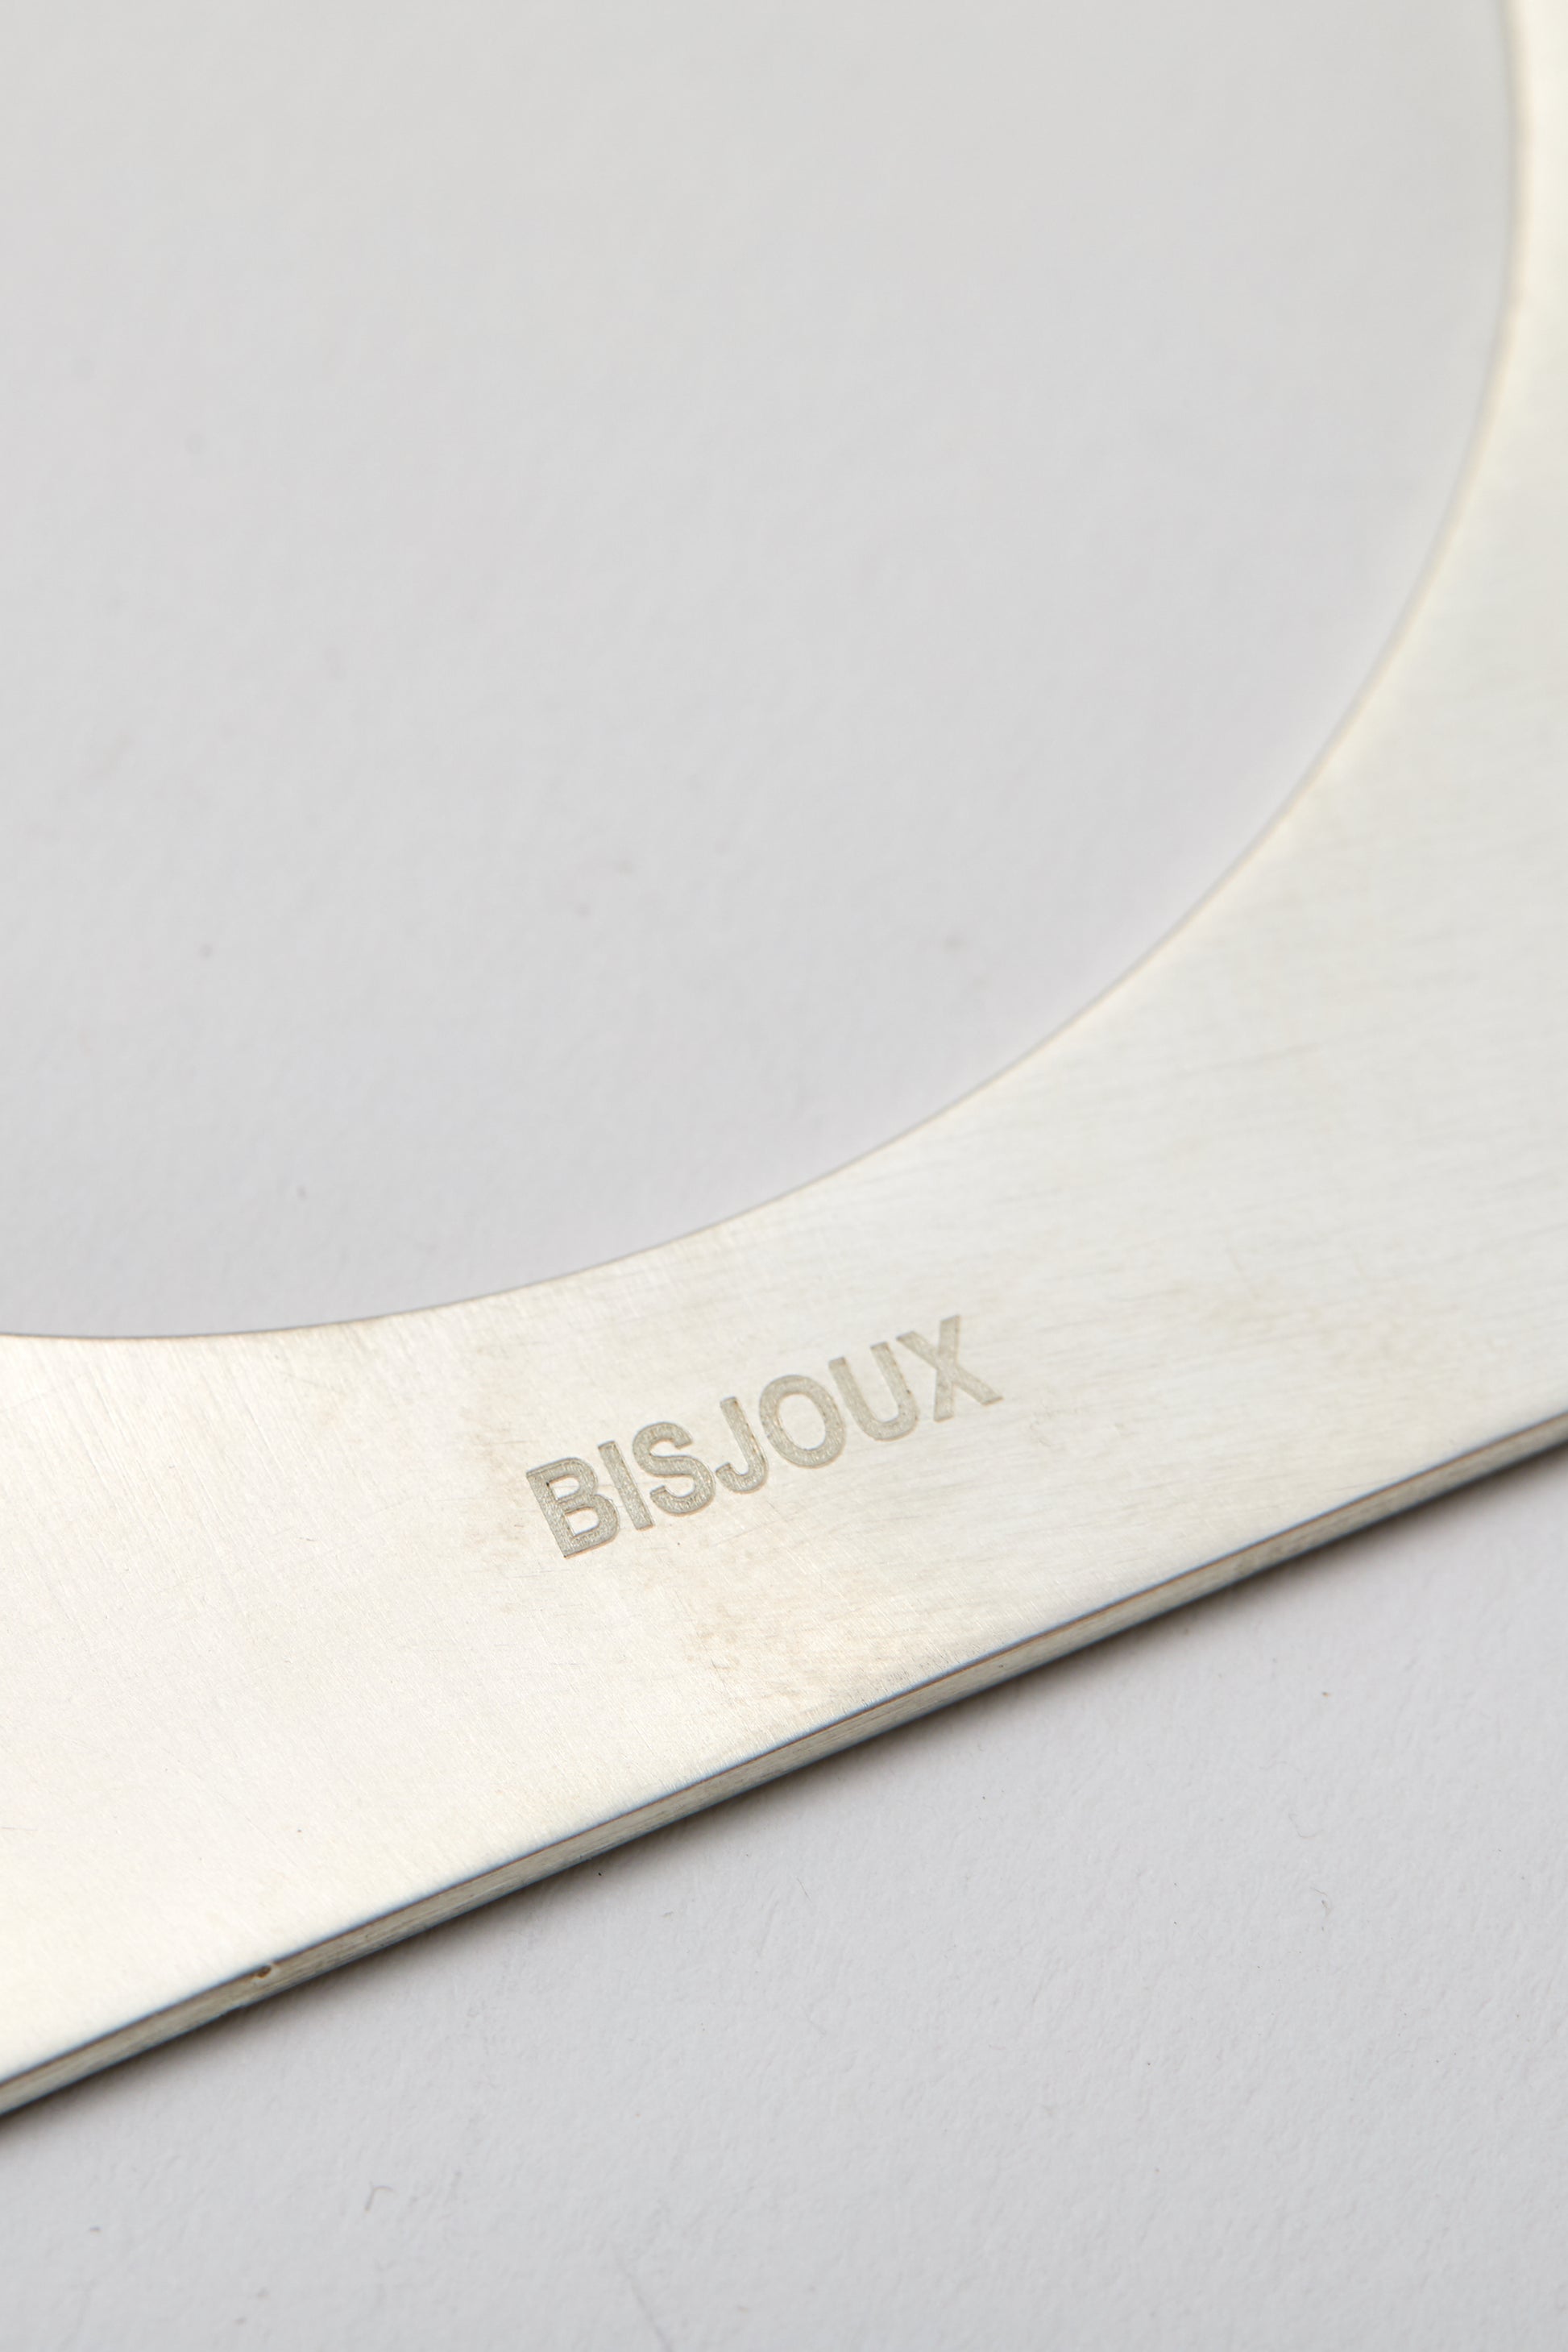 Bisjoux-Silver-Handcrafted-Disc-Flat-Bangle-Cuff-Bracelet-Square